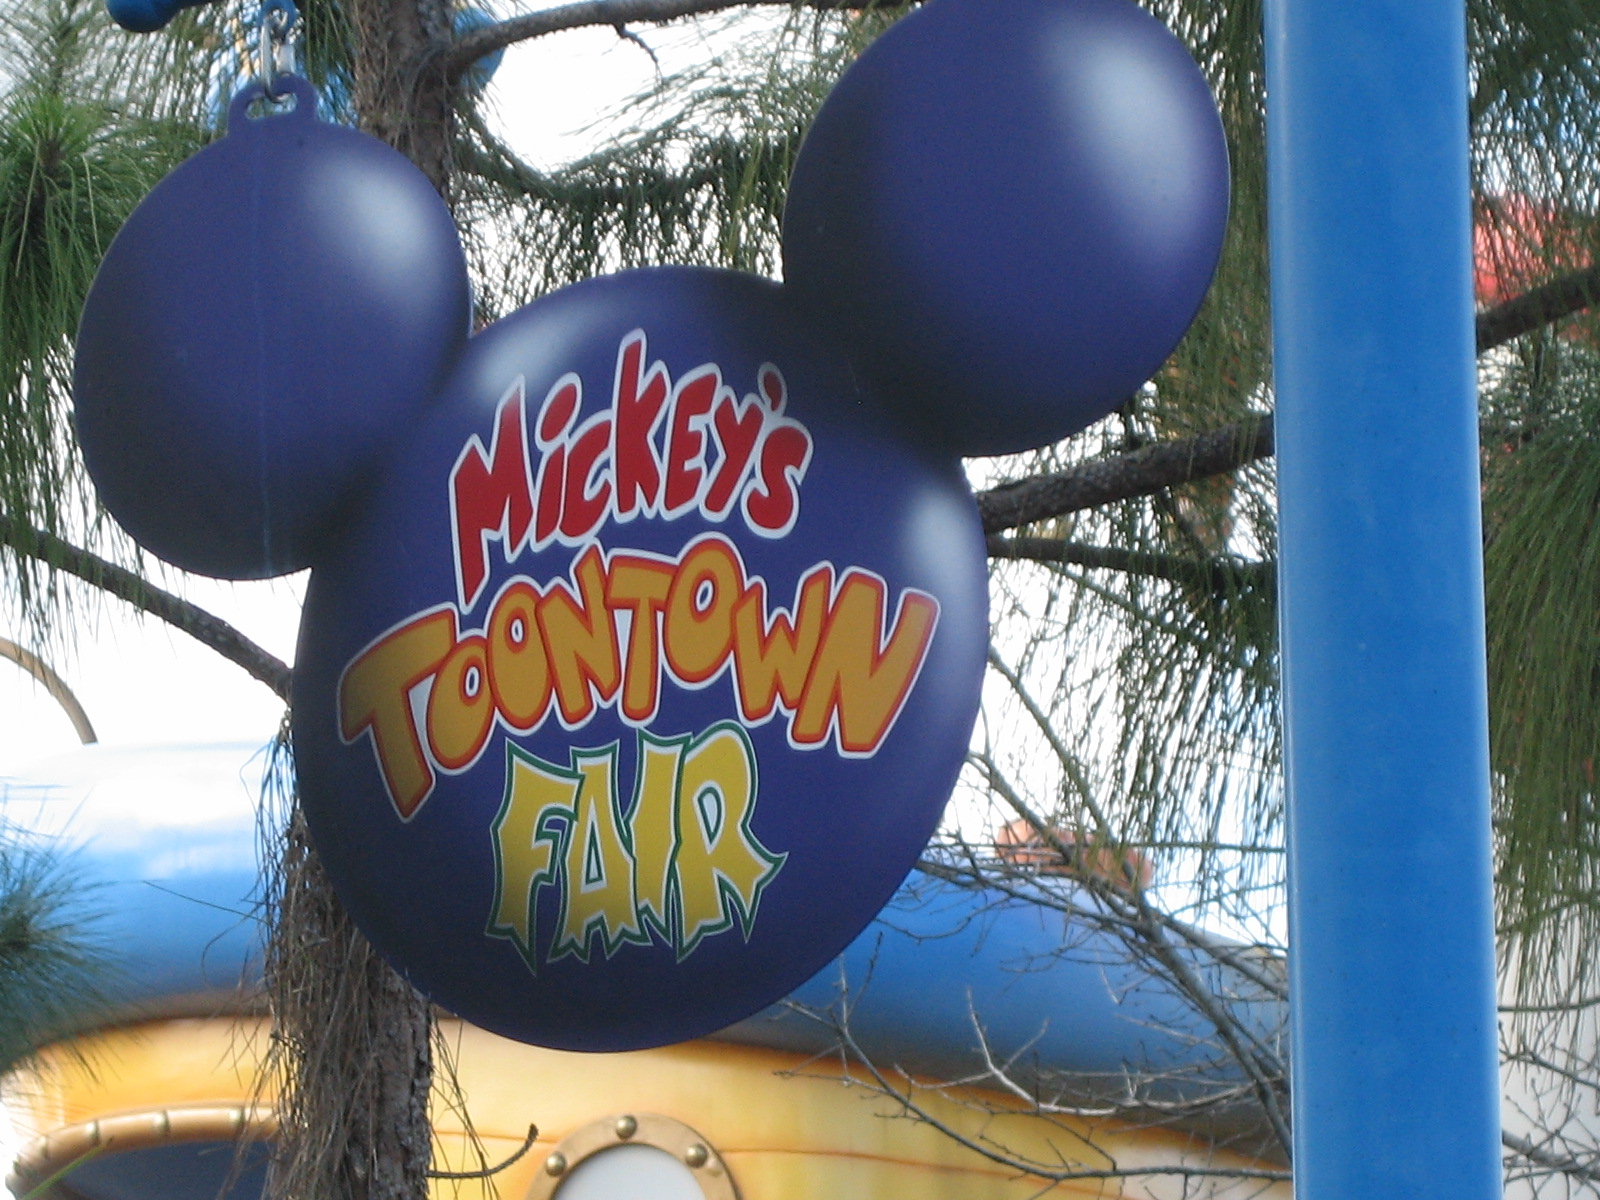 Toon Town sign